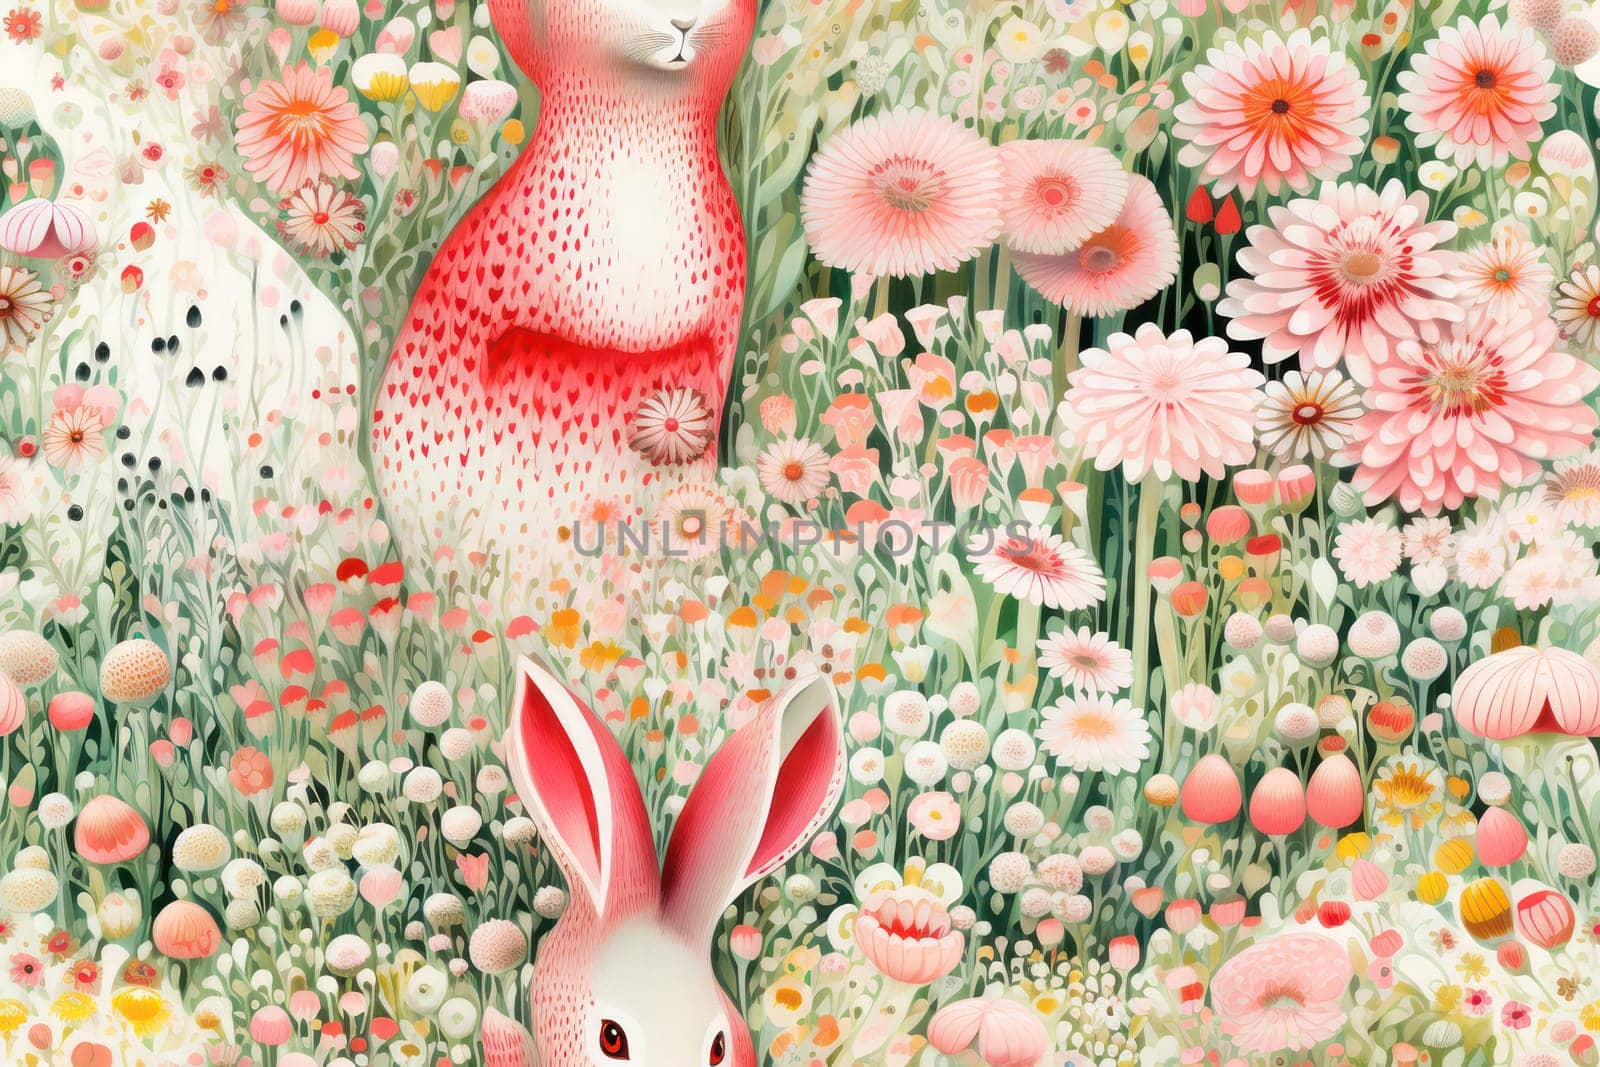 Whimsical Rabbit's Delight: A Charming, Cute Floral Bunny Cartoon - a Seamless Pattern Illustration with Happy, Vintage, and Romantic Vibes.